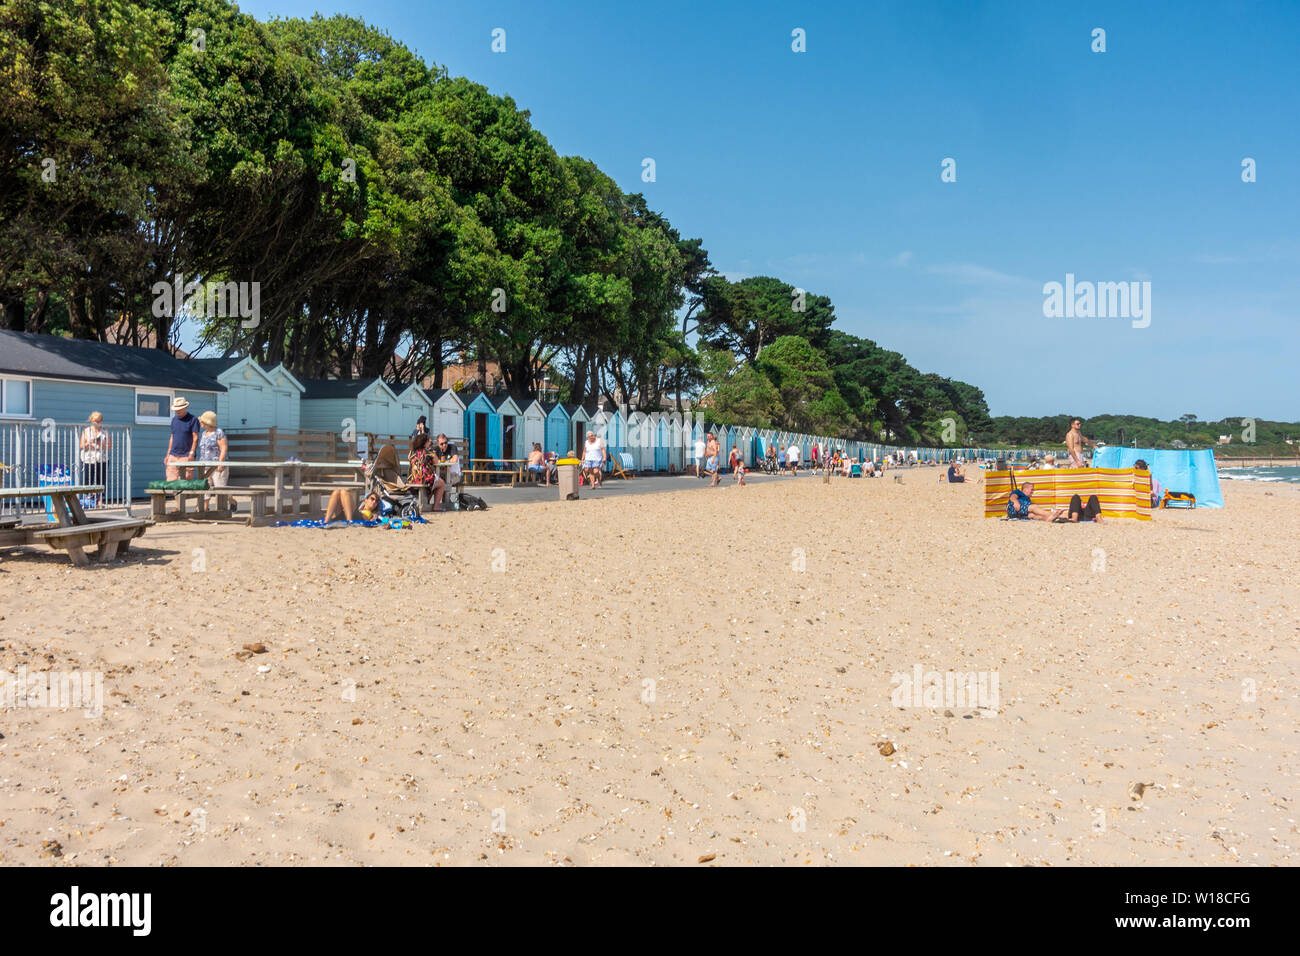 A view of Avon beach at Mudeford, Christchurch in Dorset, UK. A sandy beach seen here on a hot, sunny summer day with blue sky Stock Photo